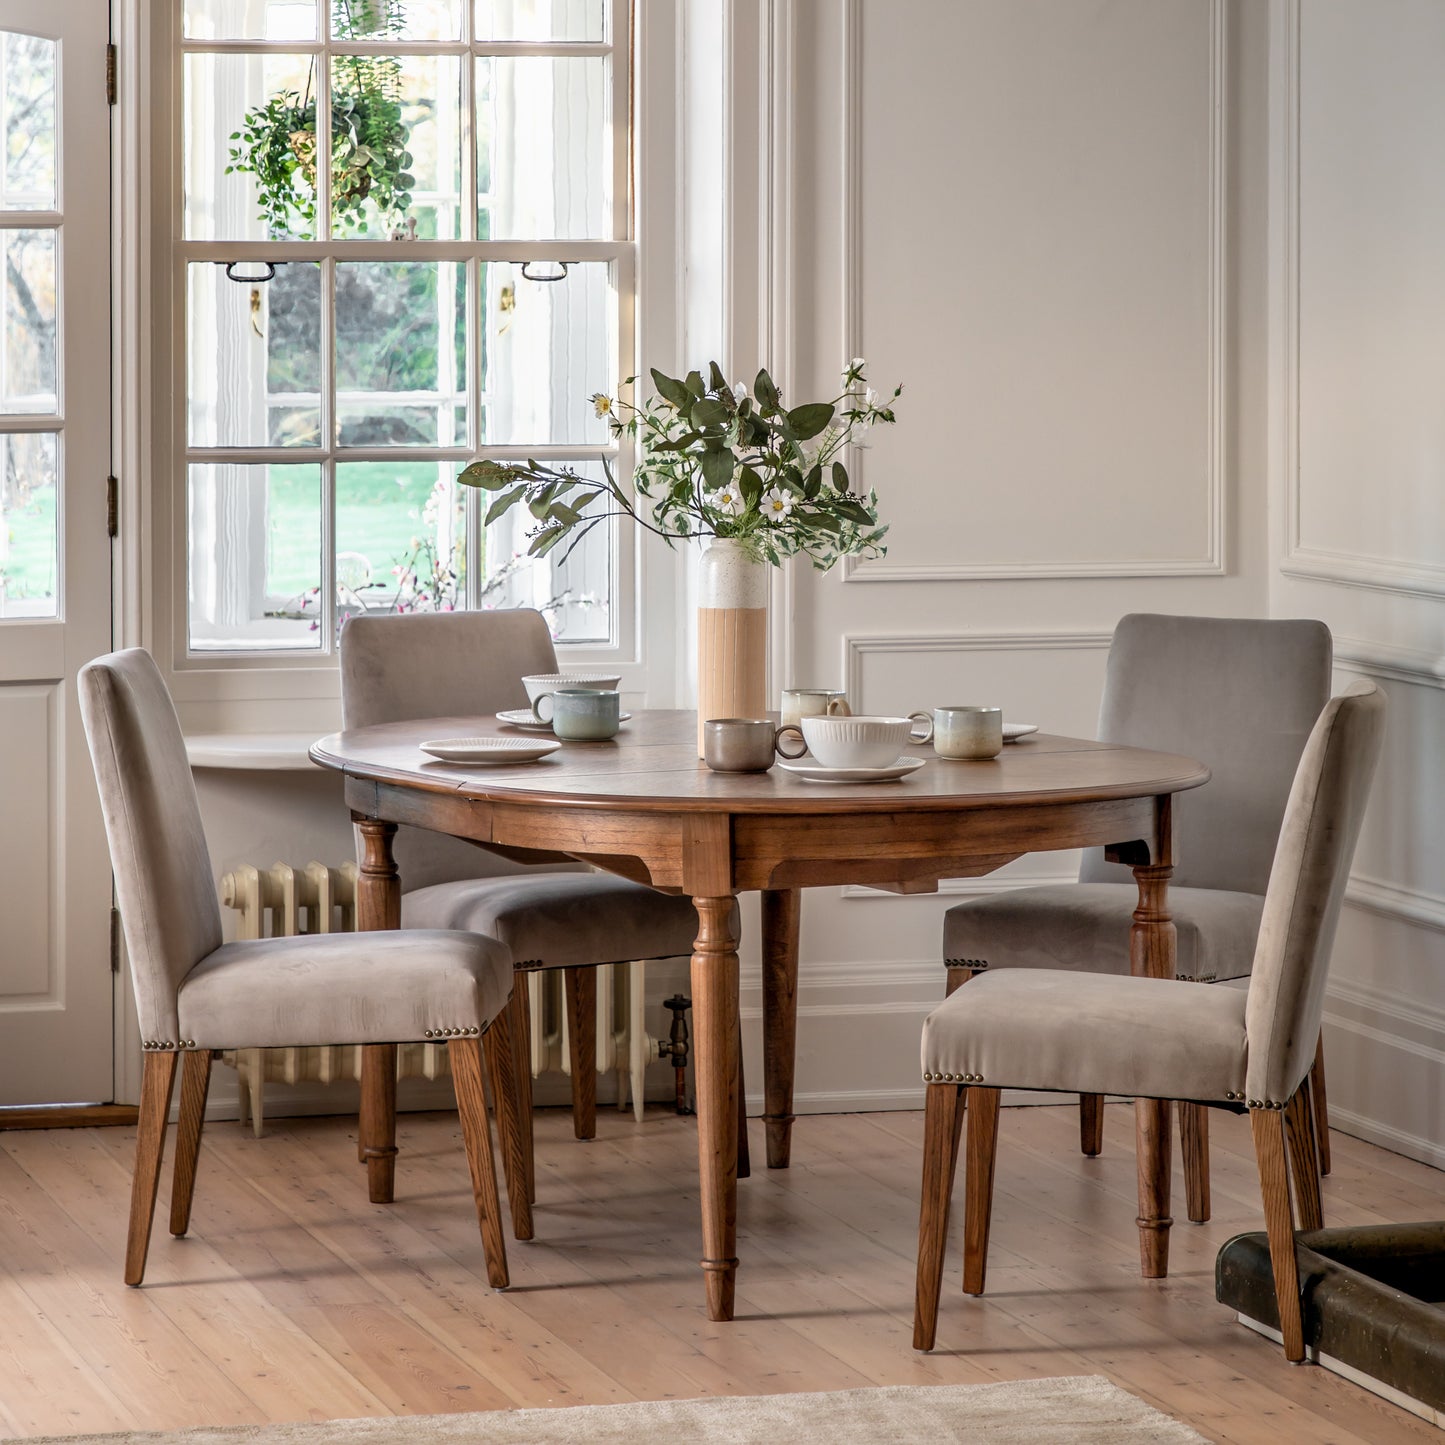 A dining room with a Kikiathome.co.uk Sweaton Extending Round Table 1200/1600x1200x750mm and chairs for elegant home furniture and interior decor.